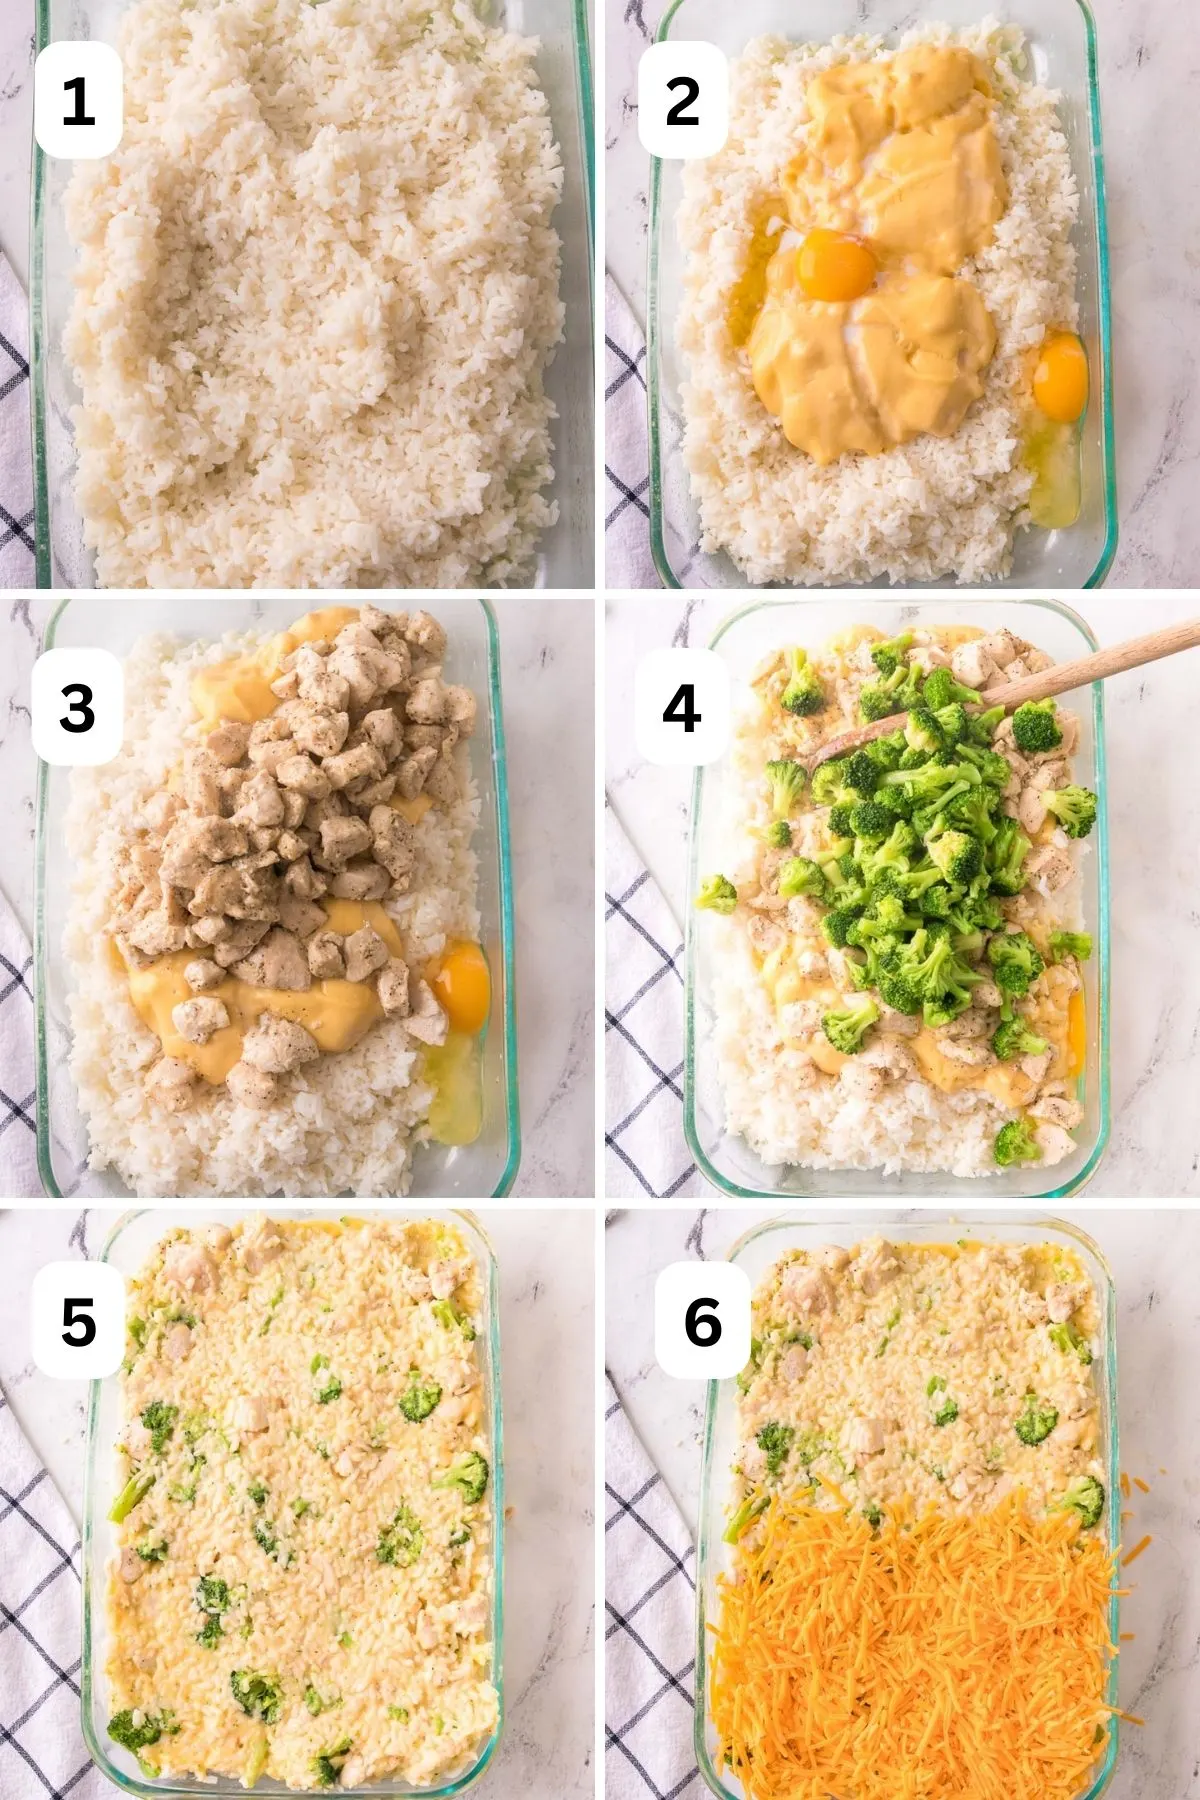 Collage of 6 pictures showing how to assemble the chicken, broccoli, and rice casserole